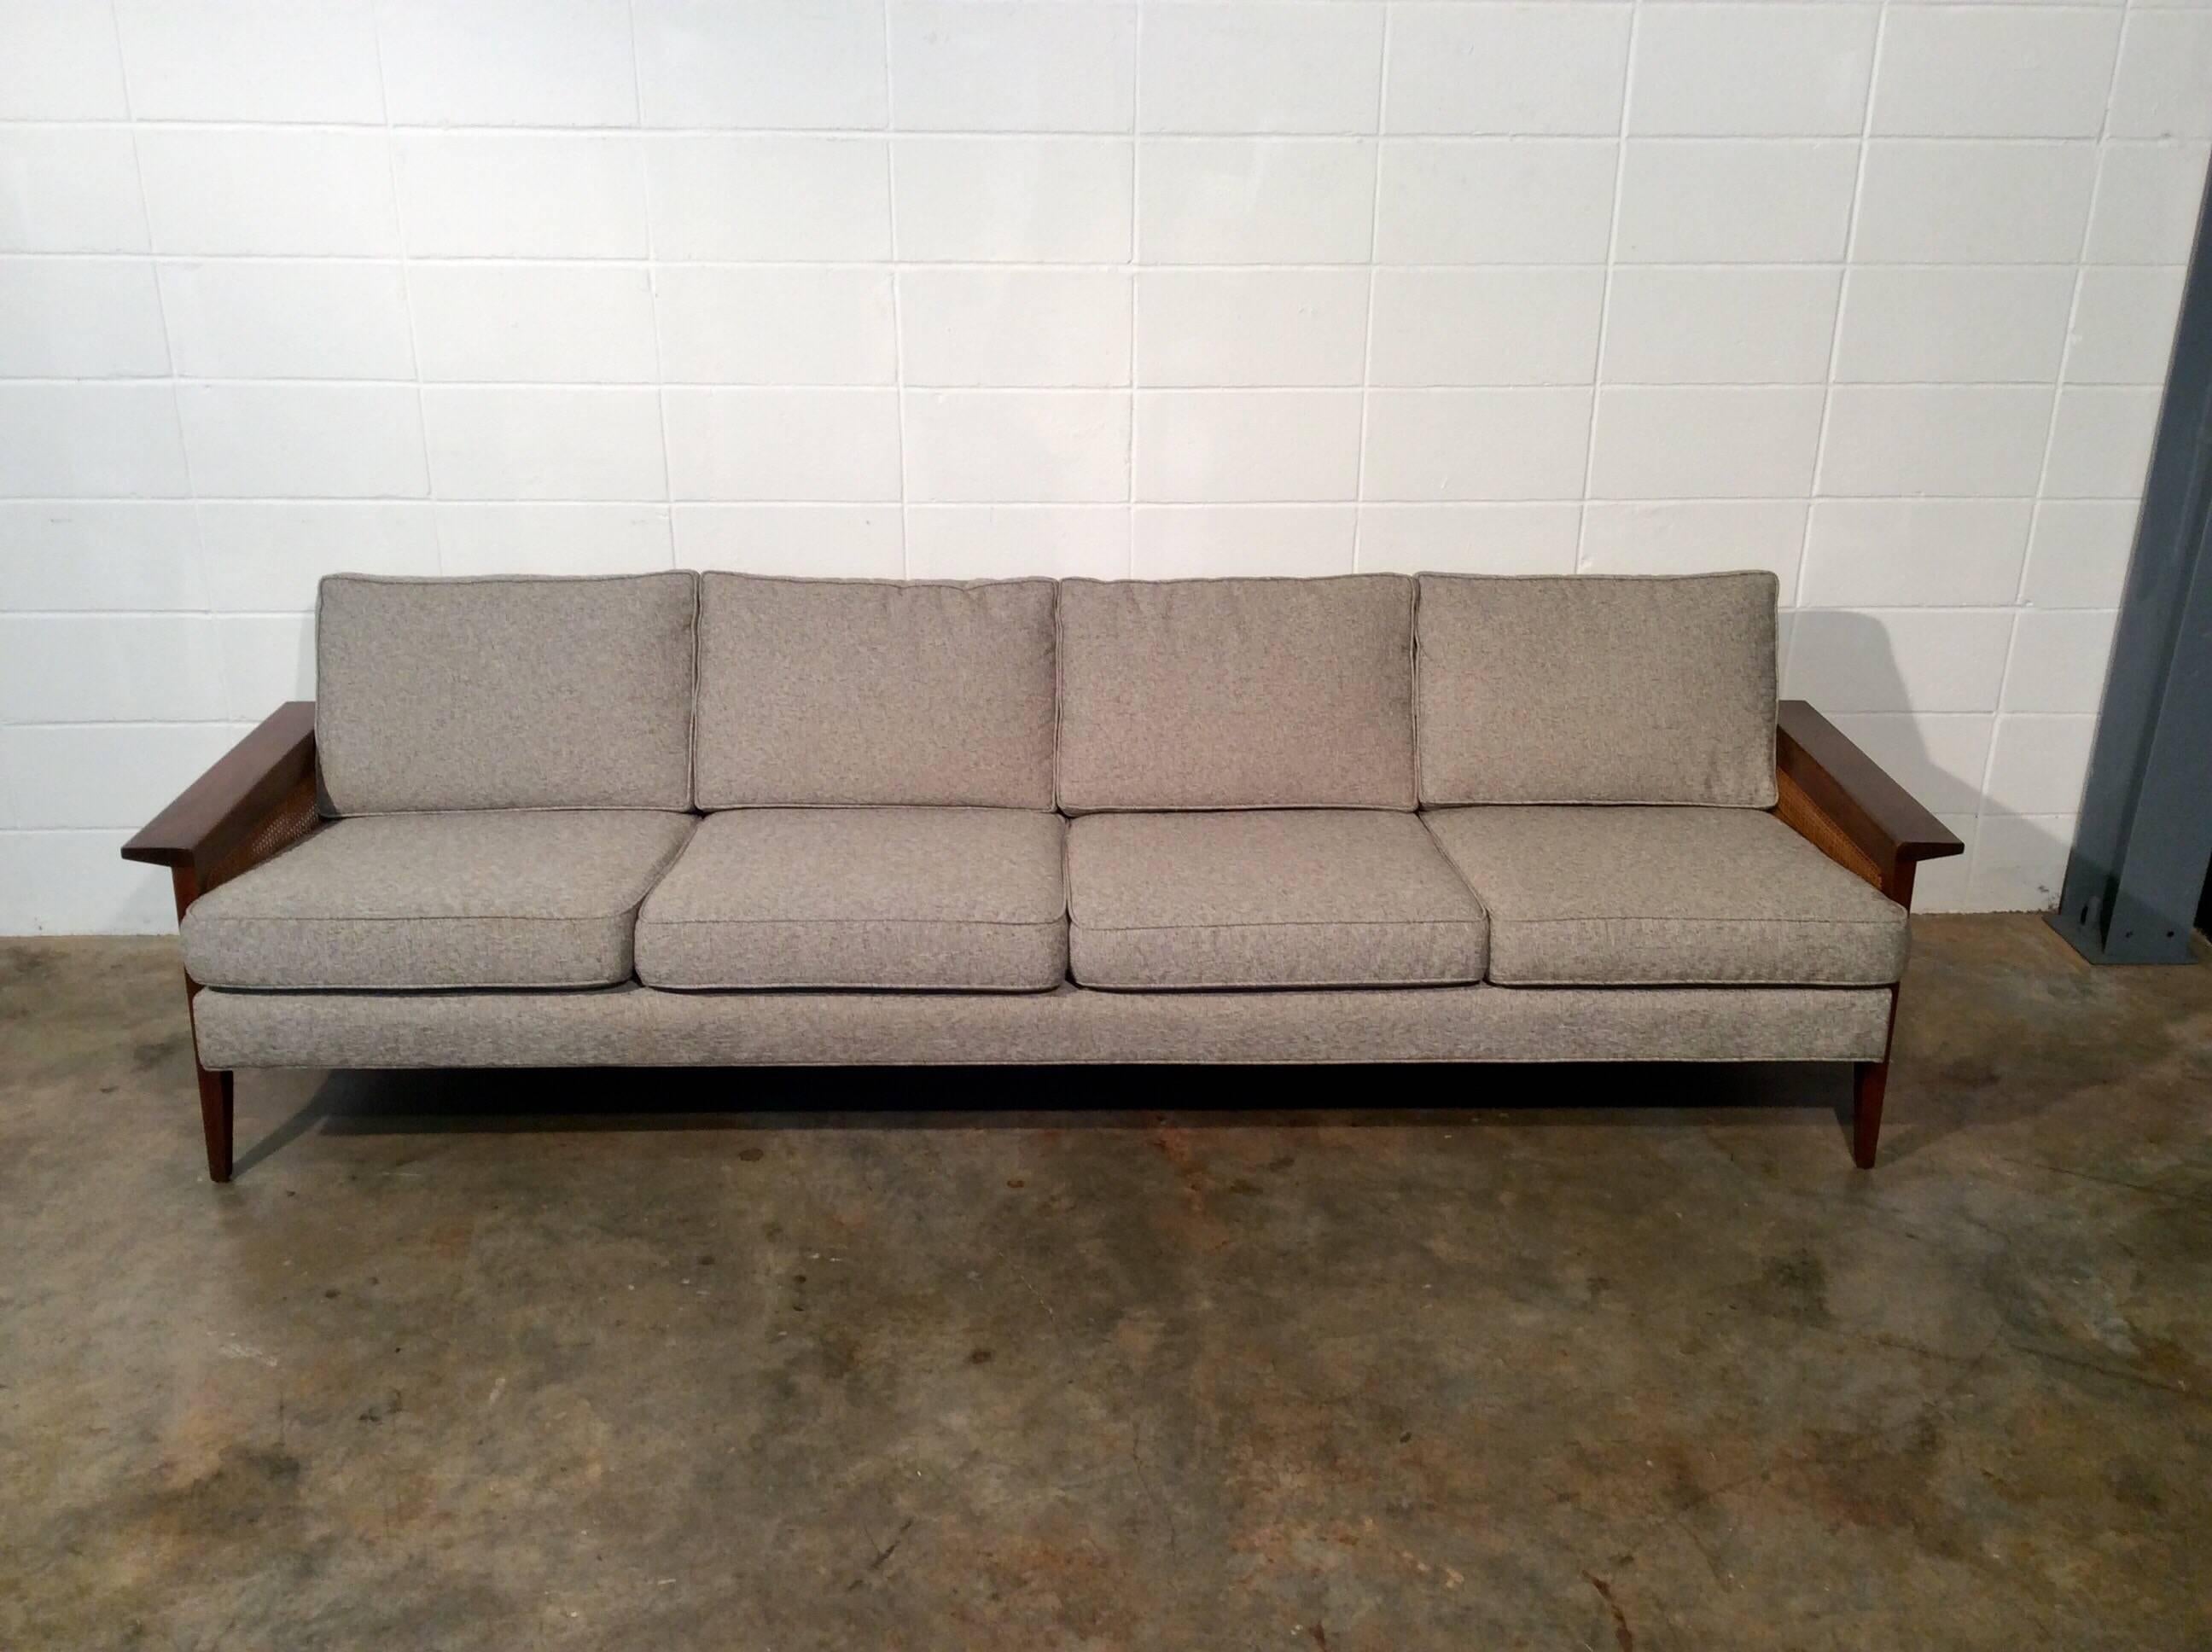 Unique and Restored Mid-Century Modern Sofa by Iconic Galloways of Tampa 1